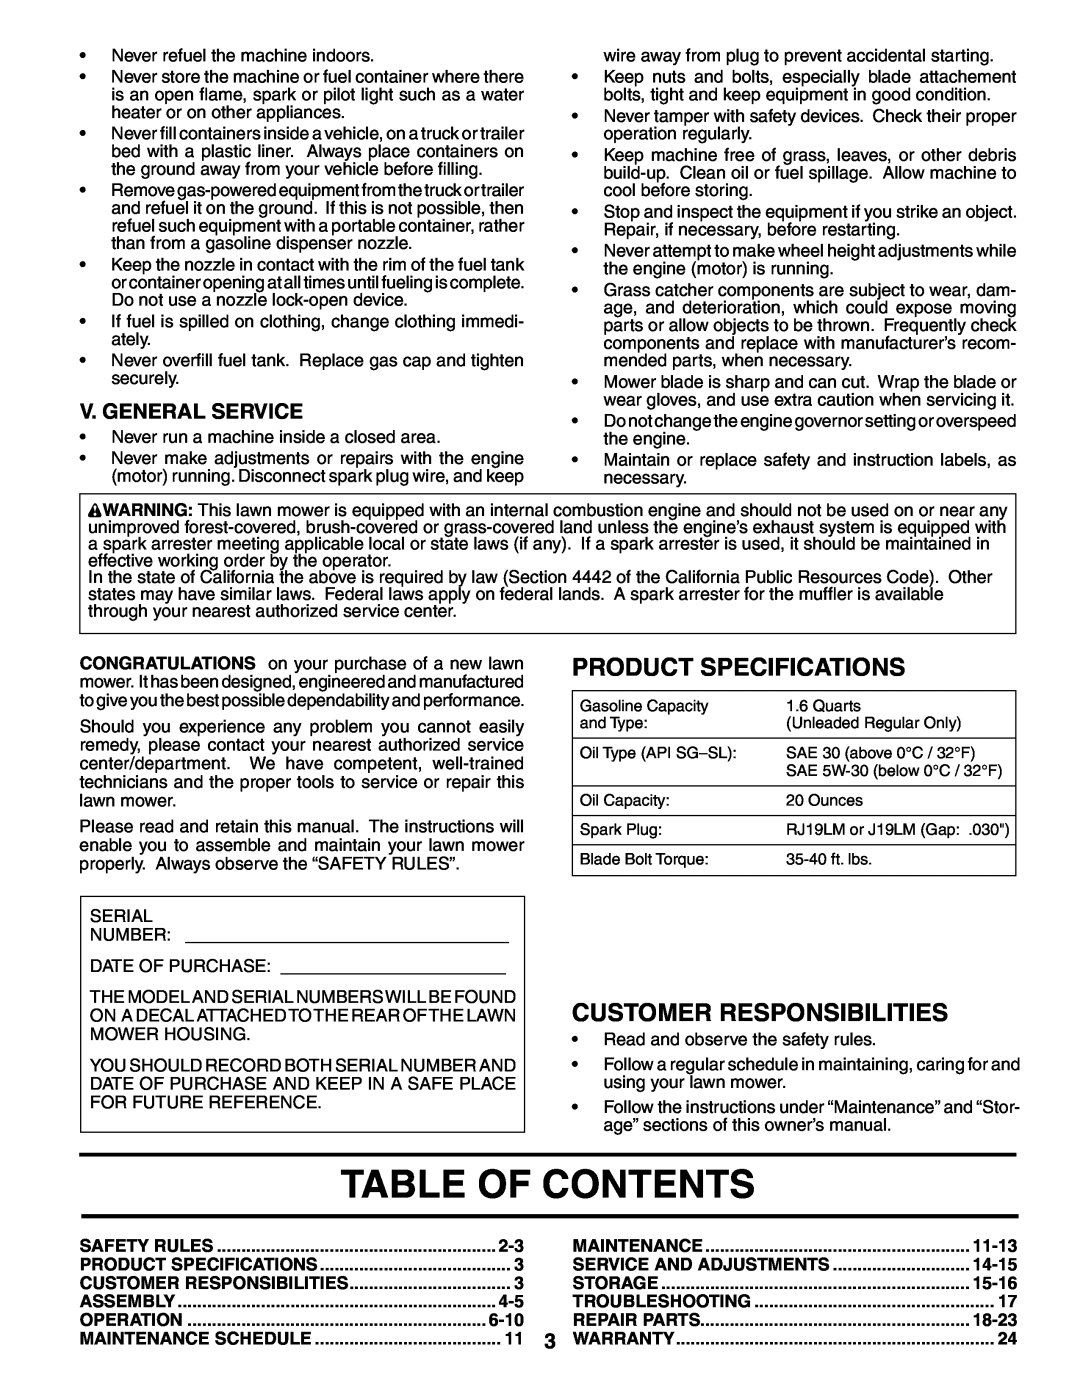 Husqvarna 917.37594 owner manual Table Of Contents, Product Specifications, Customer Responsibilities, V. General Service 